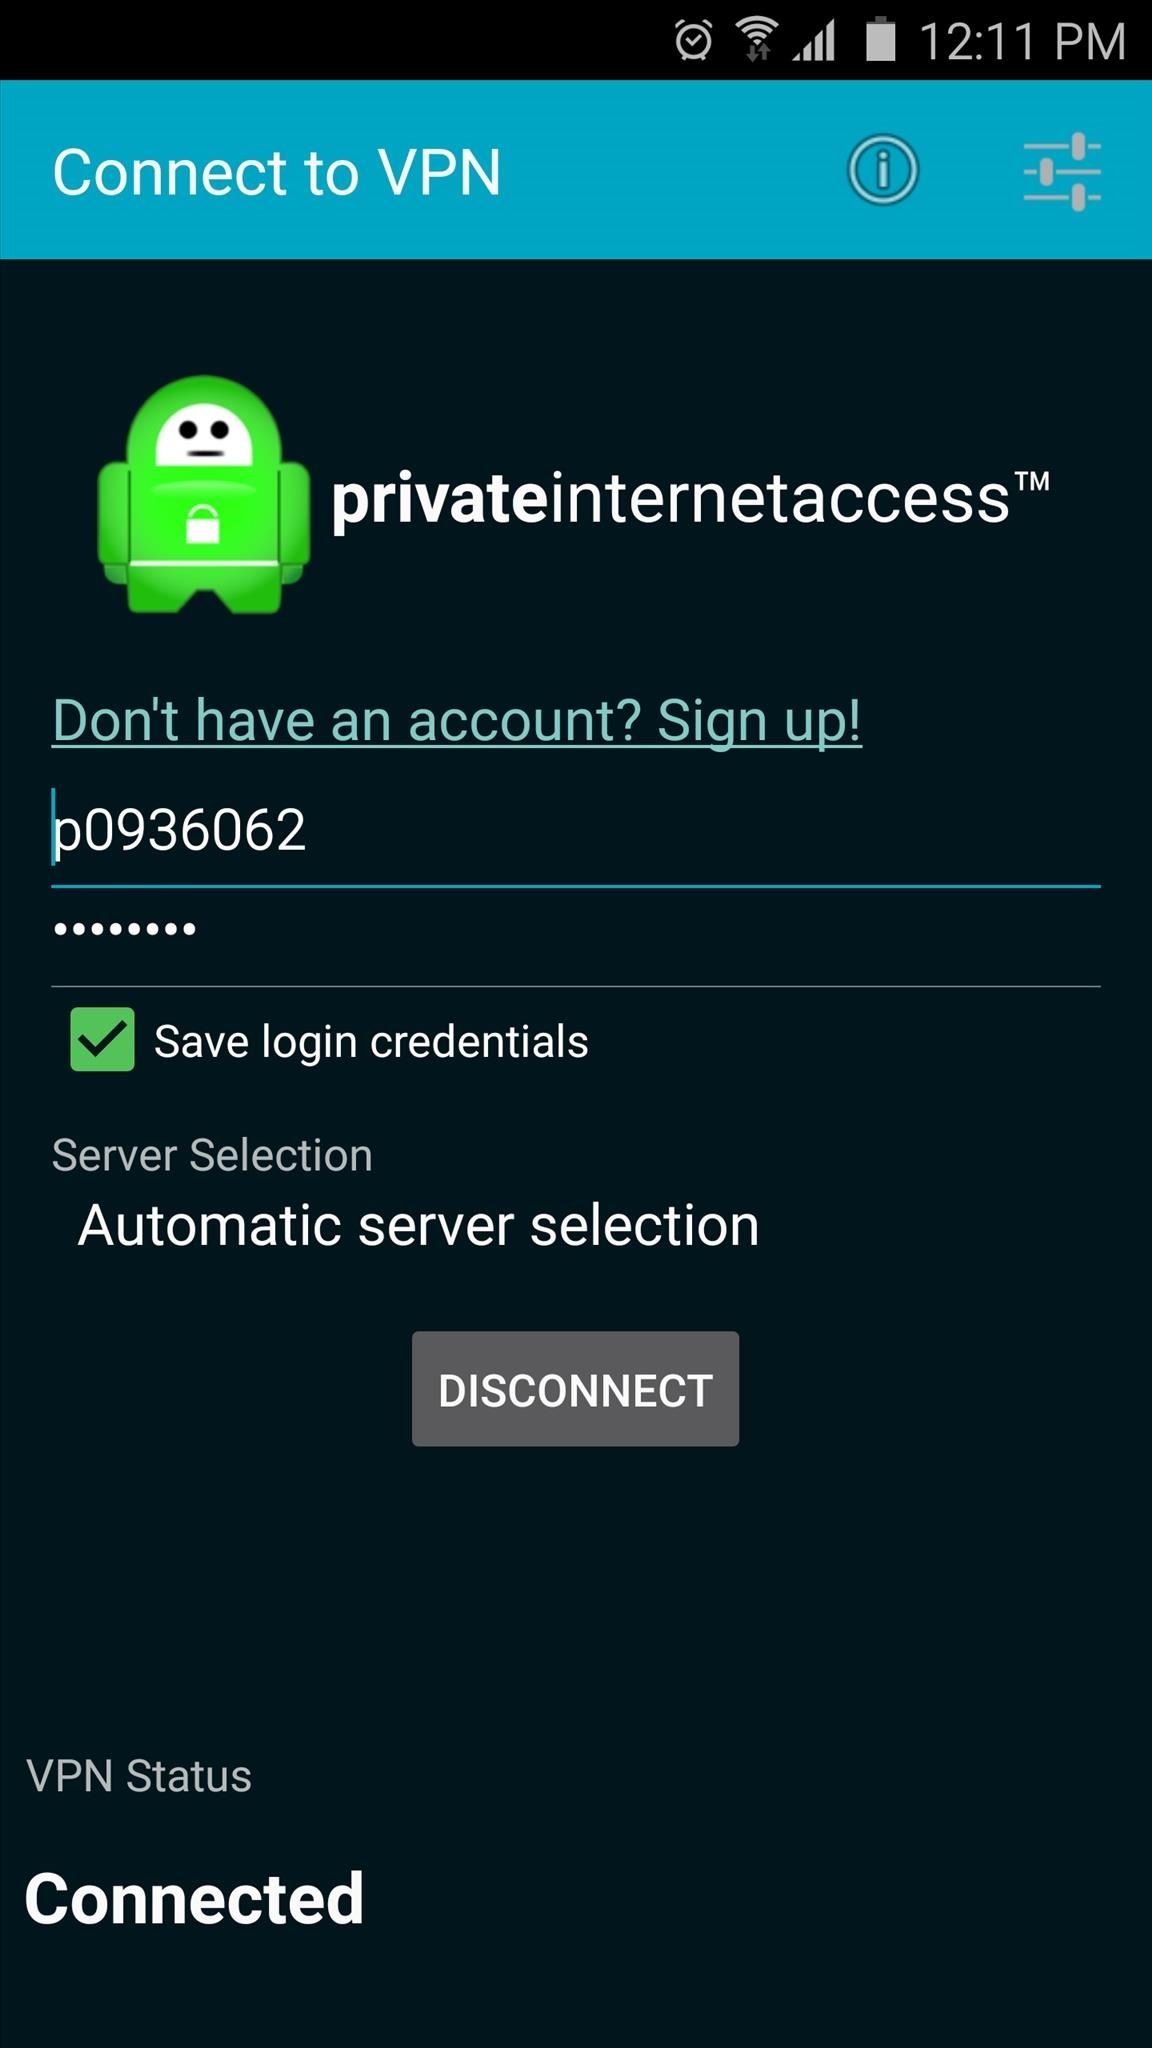 Privacy 101: Using Android Without Compromising Security